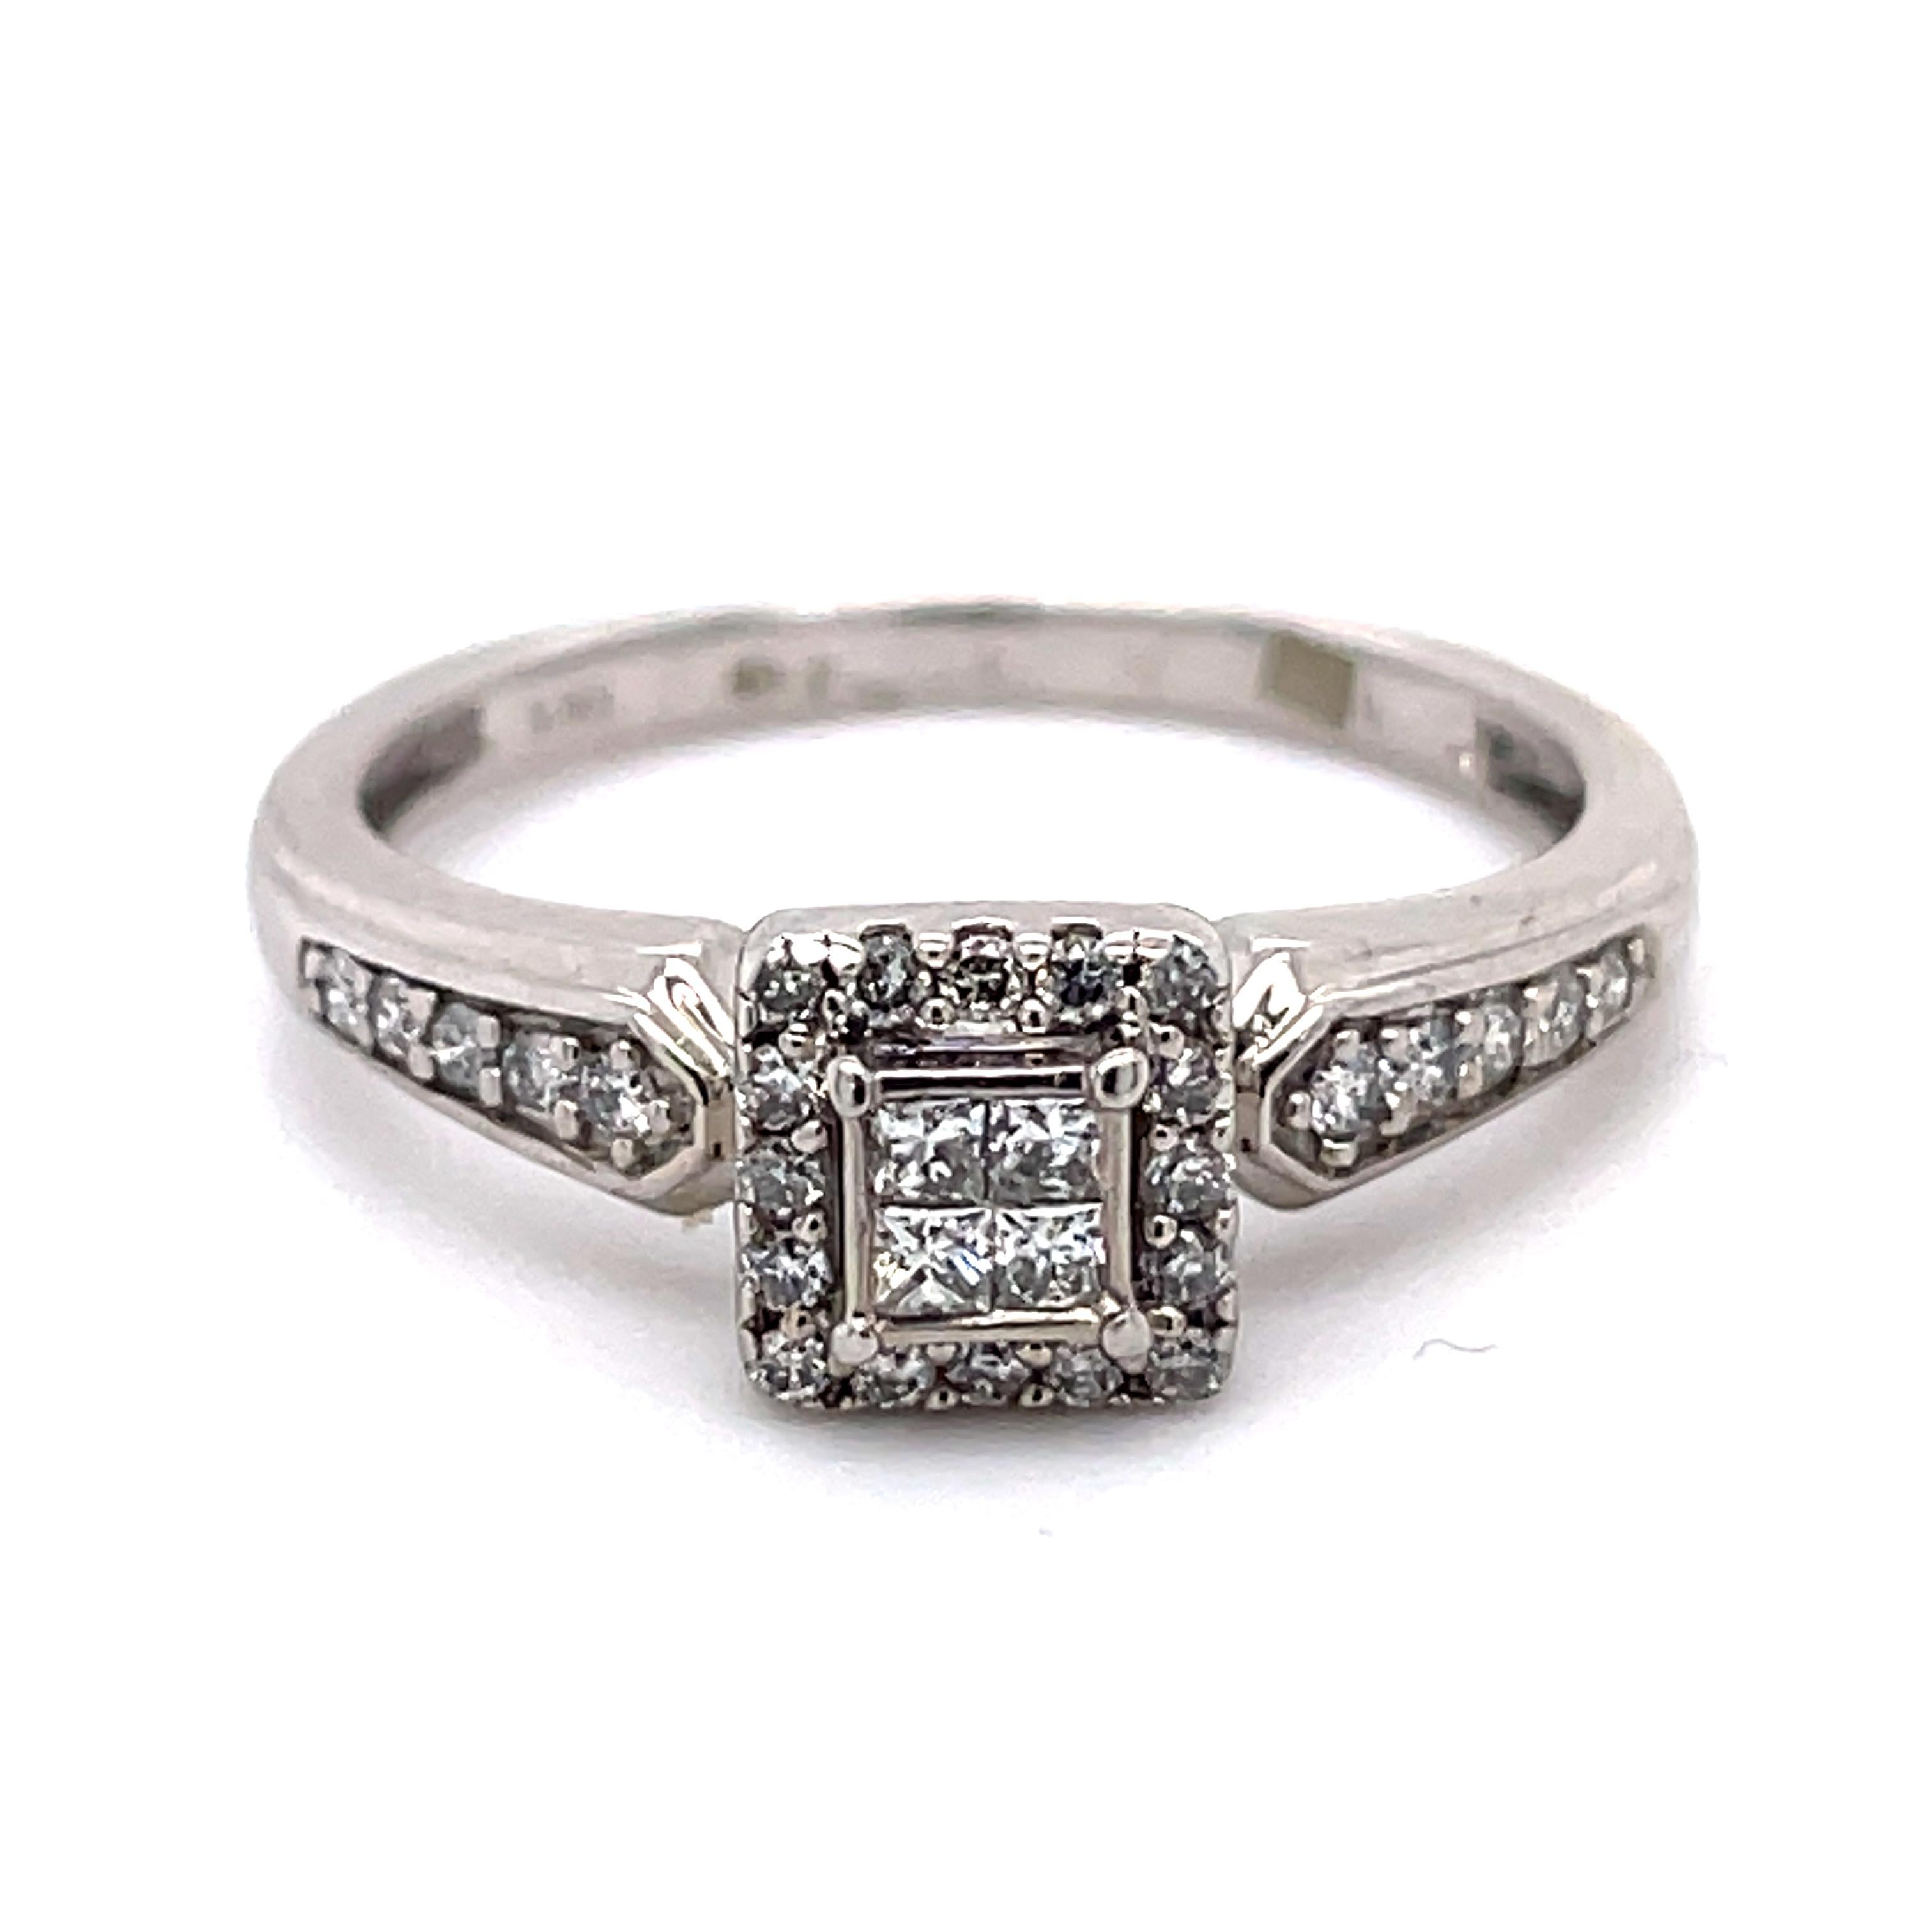 Vintage princess cut ring, dainty ring, 10K, 0.17ct diamonds, gold promise ring

Jewelry Material: White Gold 10k (the gold has been tested by a professional)
Total Carat Weight: 0.17ct (Approx.)
Total Metal Weight: 2.17g
Size: 6.25 US\ EU 52 \